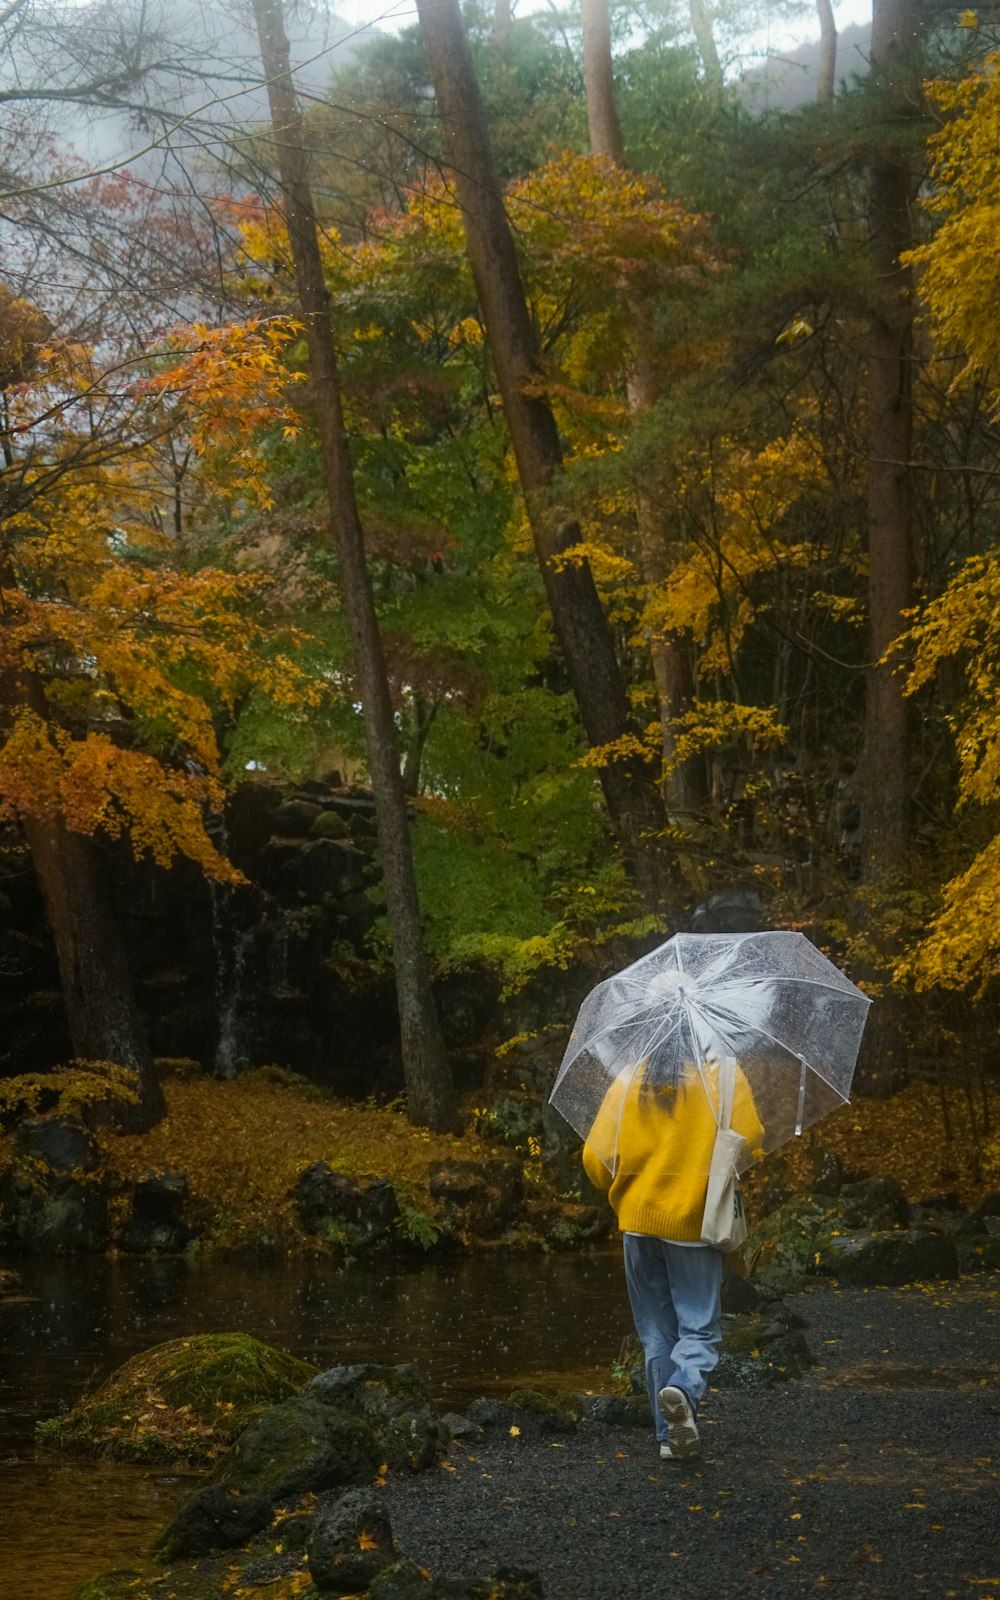 a person walking with an umbrella